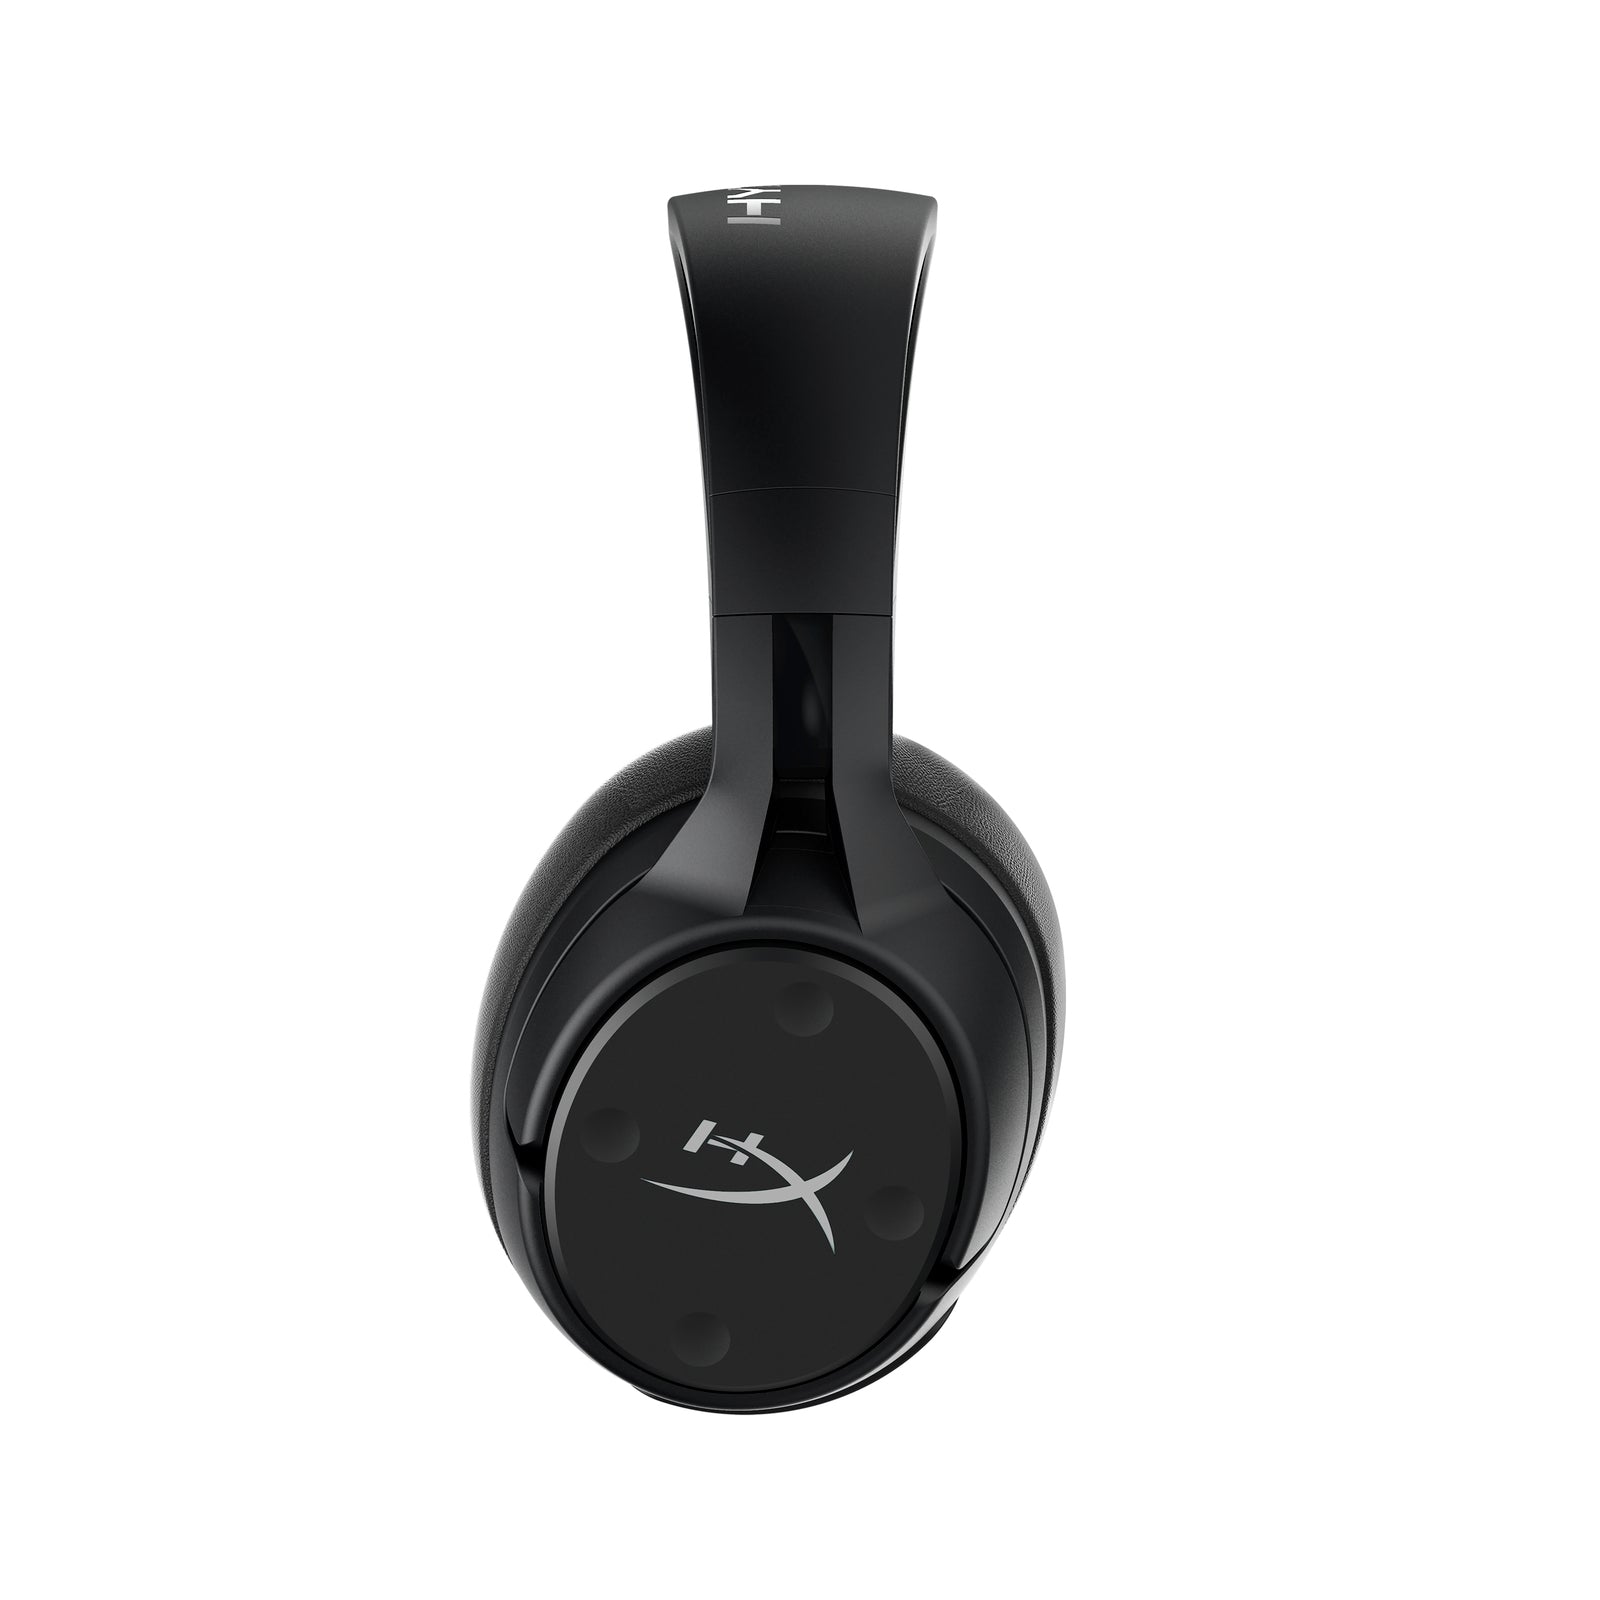 Cloud Flight S – Wireless USB Headset for PC and PS4 | HyperX ...